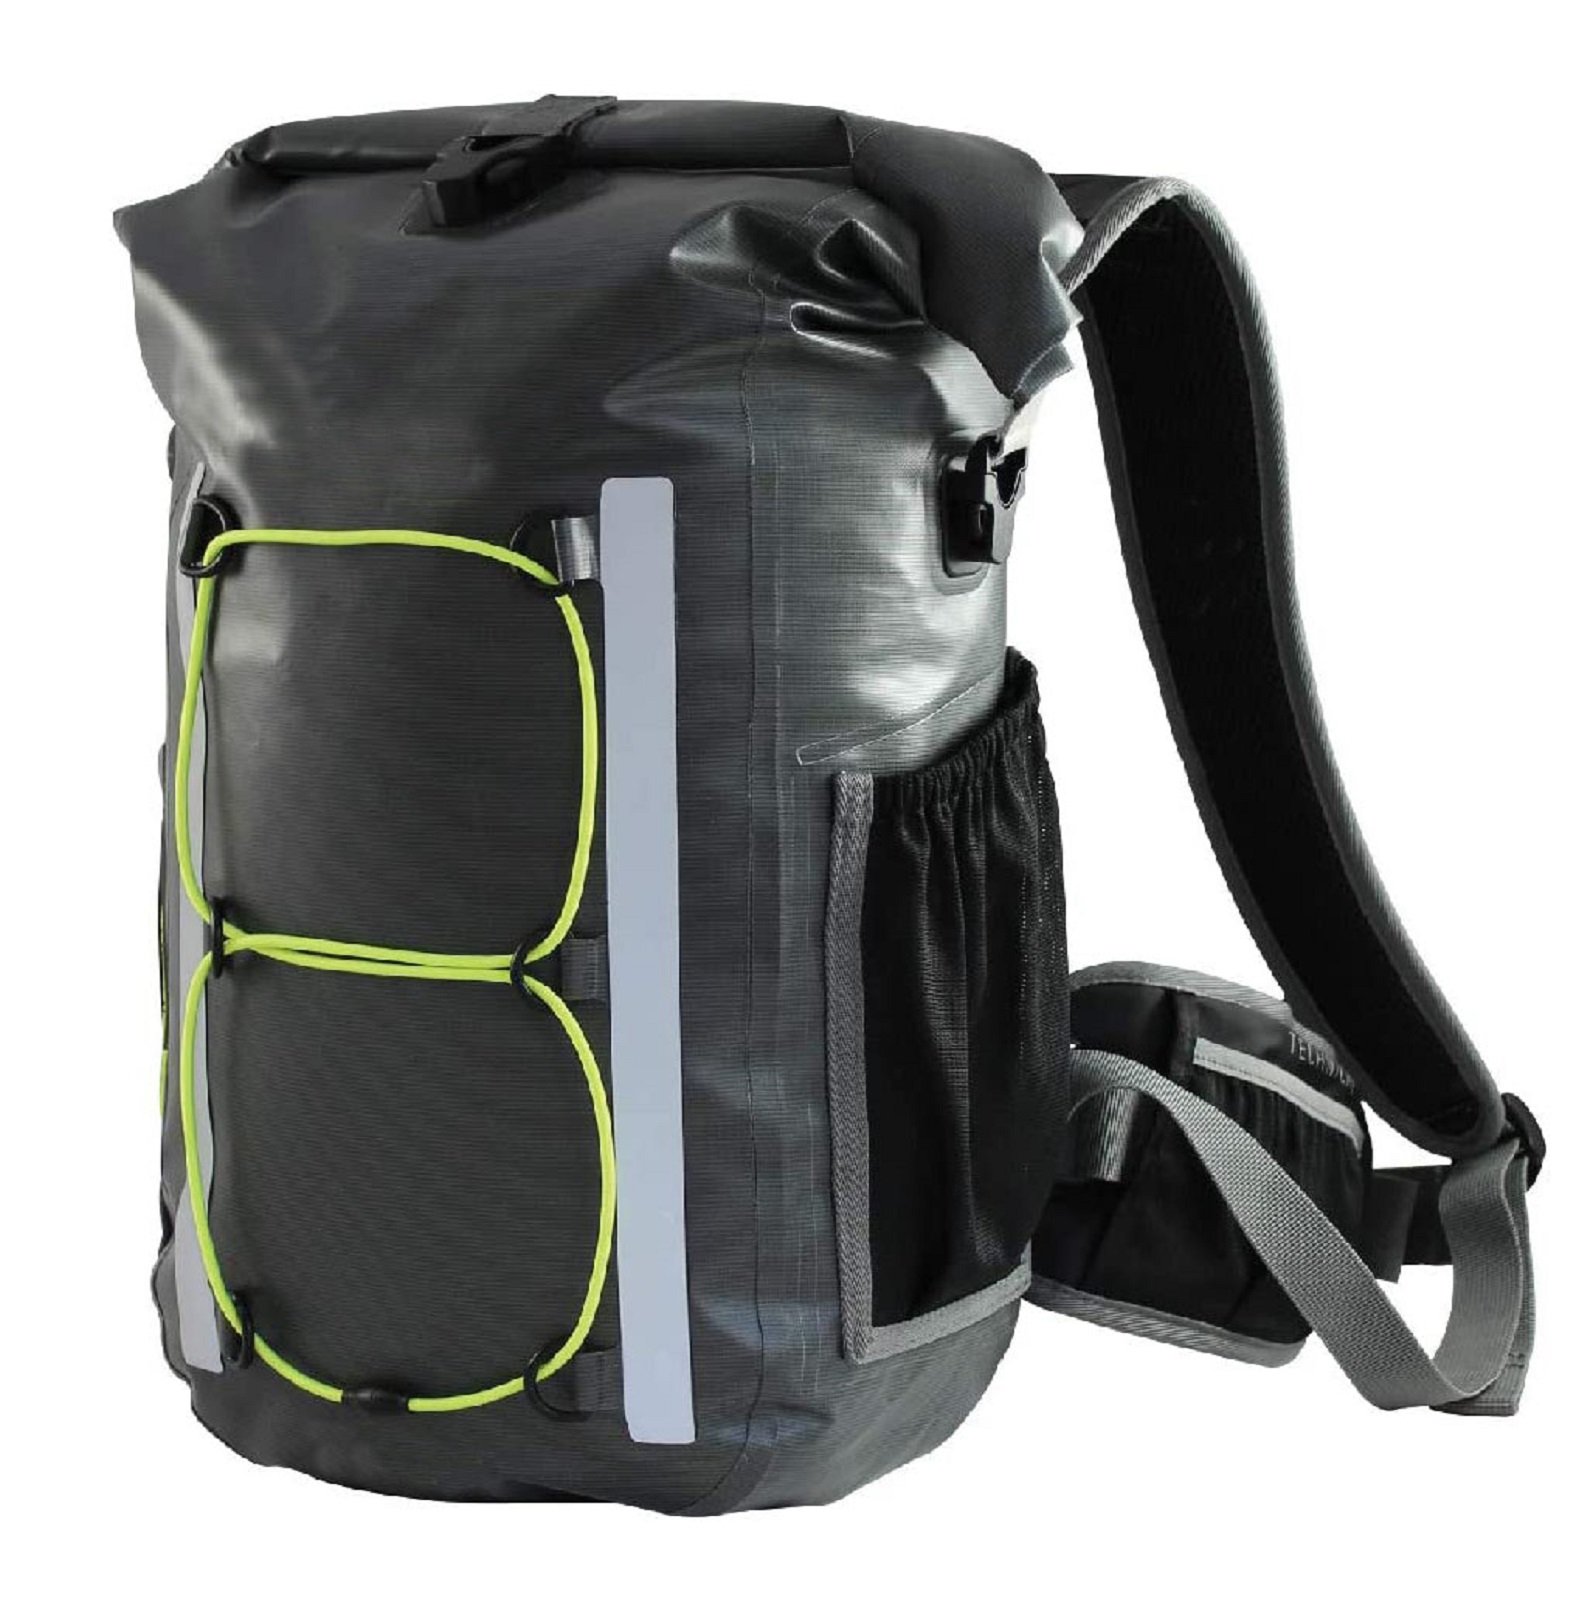 20L Dry Backpack with comfortable padded and adjustable waist strap for Climbing Hunting